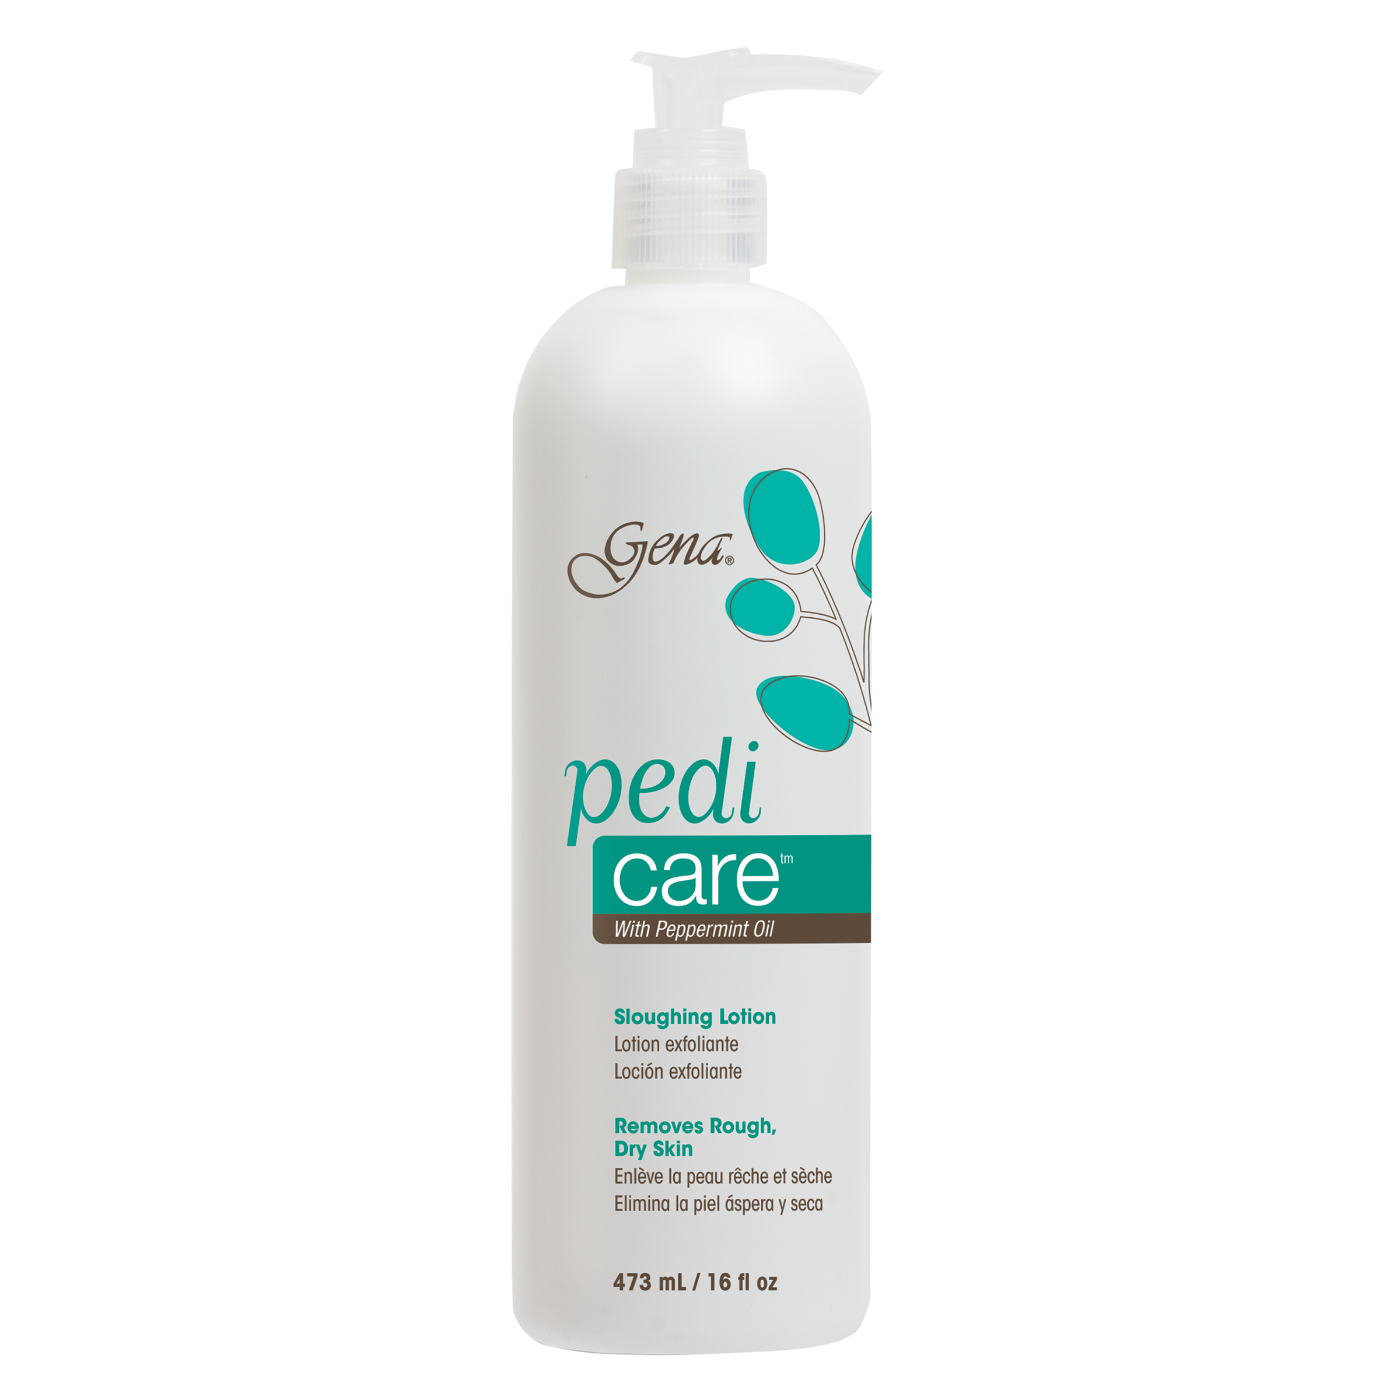 Pedi Care Sloughing Lotion with Peppermint Oil